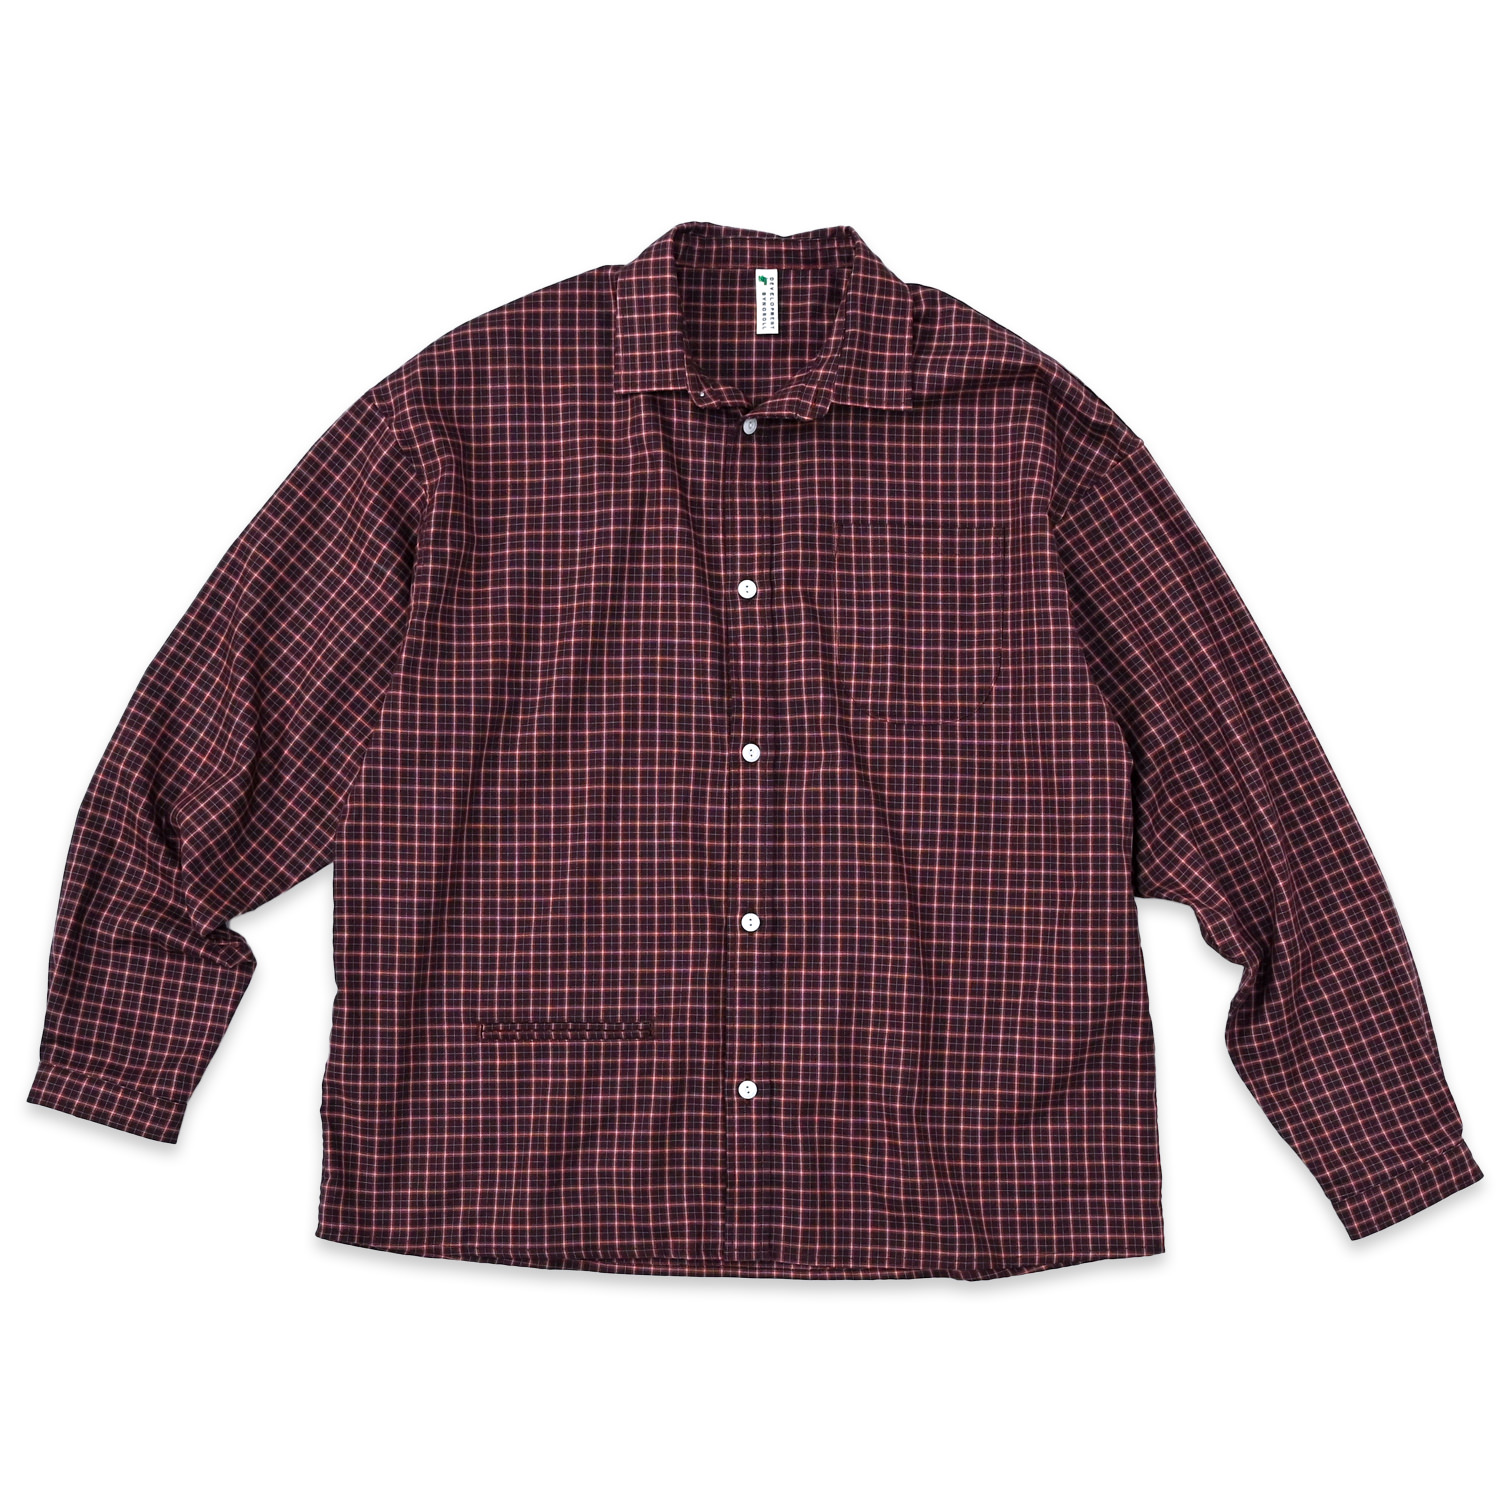 NOROLL NORMAL L/S SHIRTS